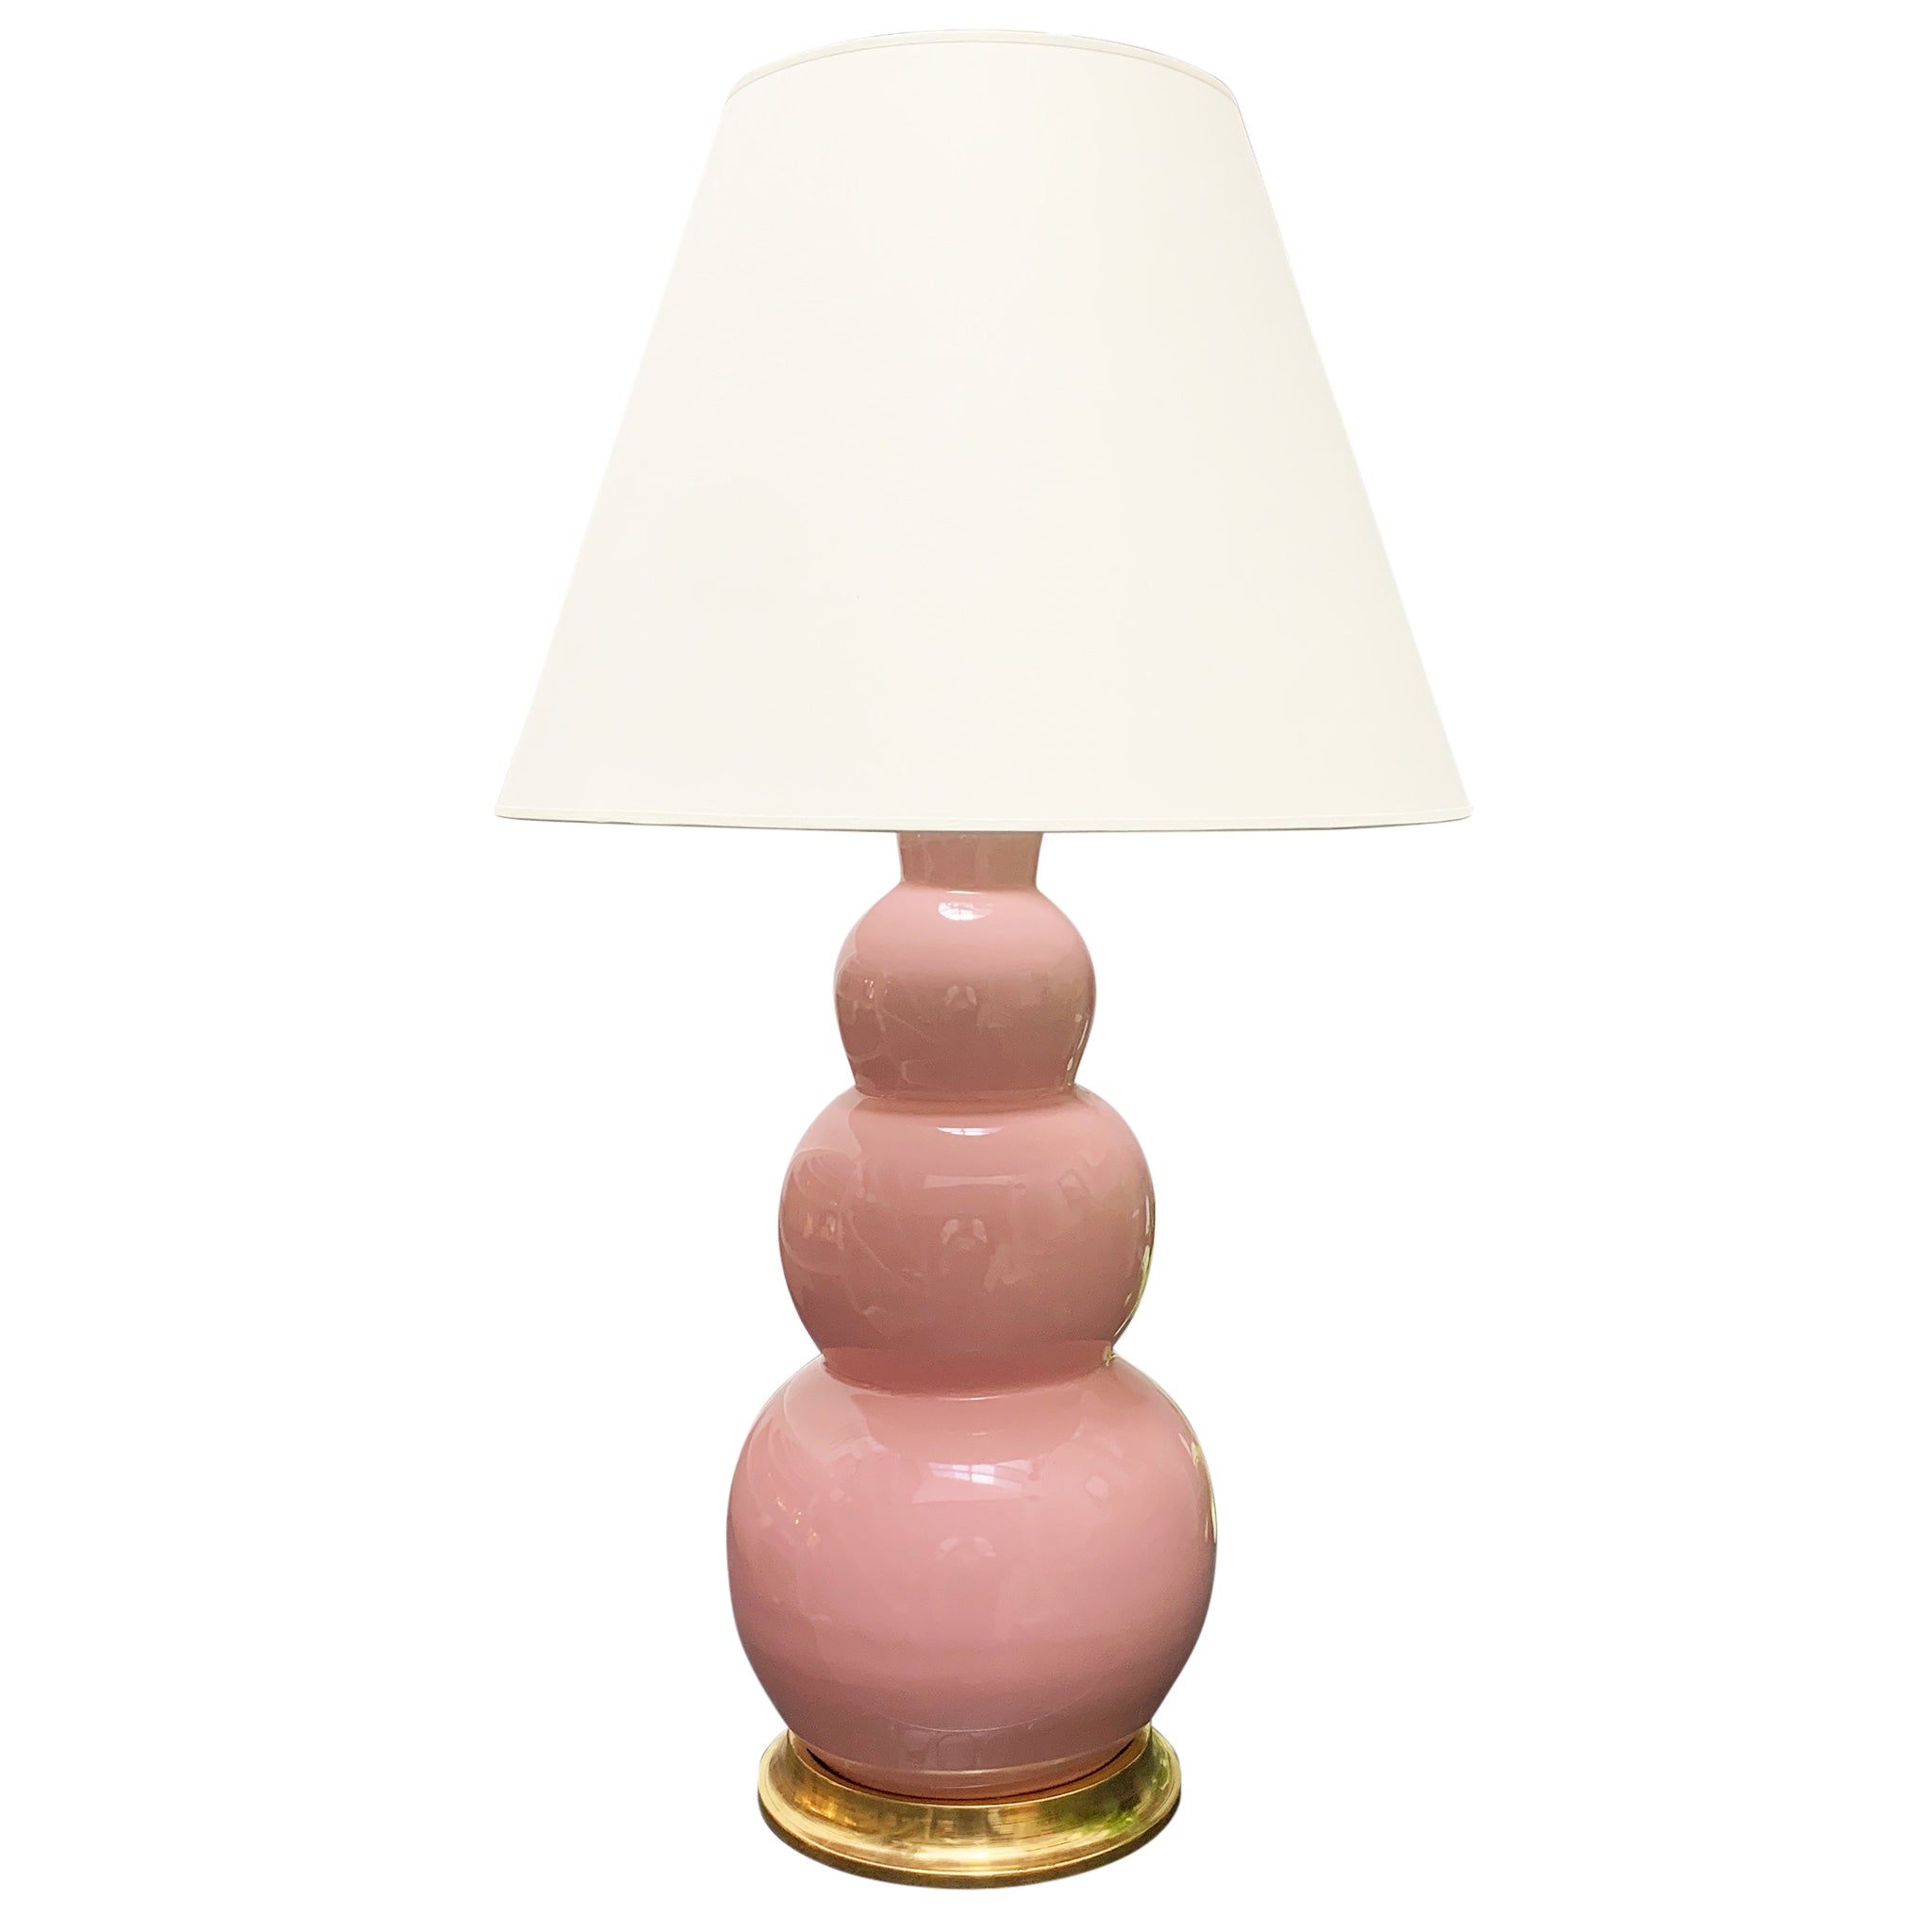 Large Three Ball Lamp in Shell Pink